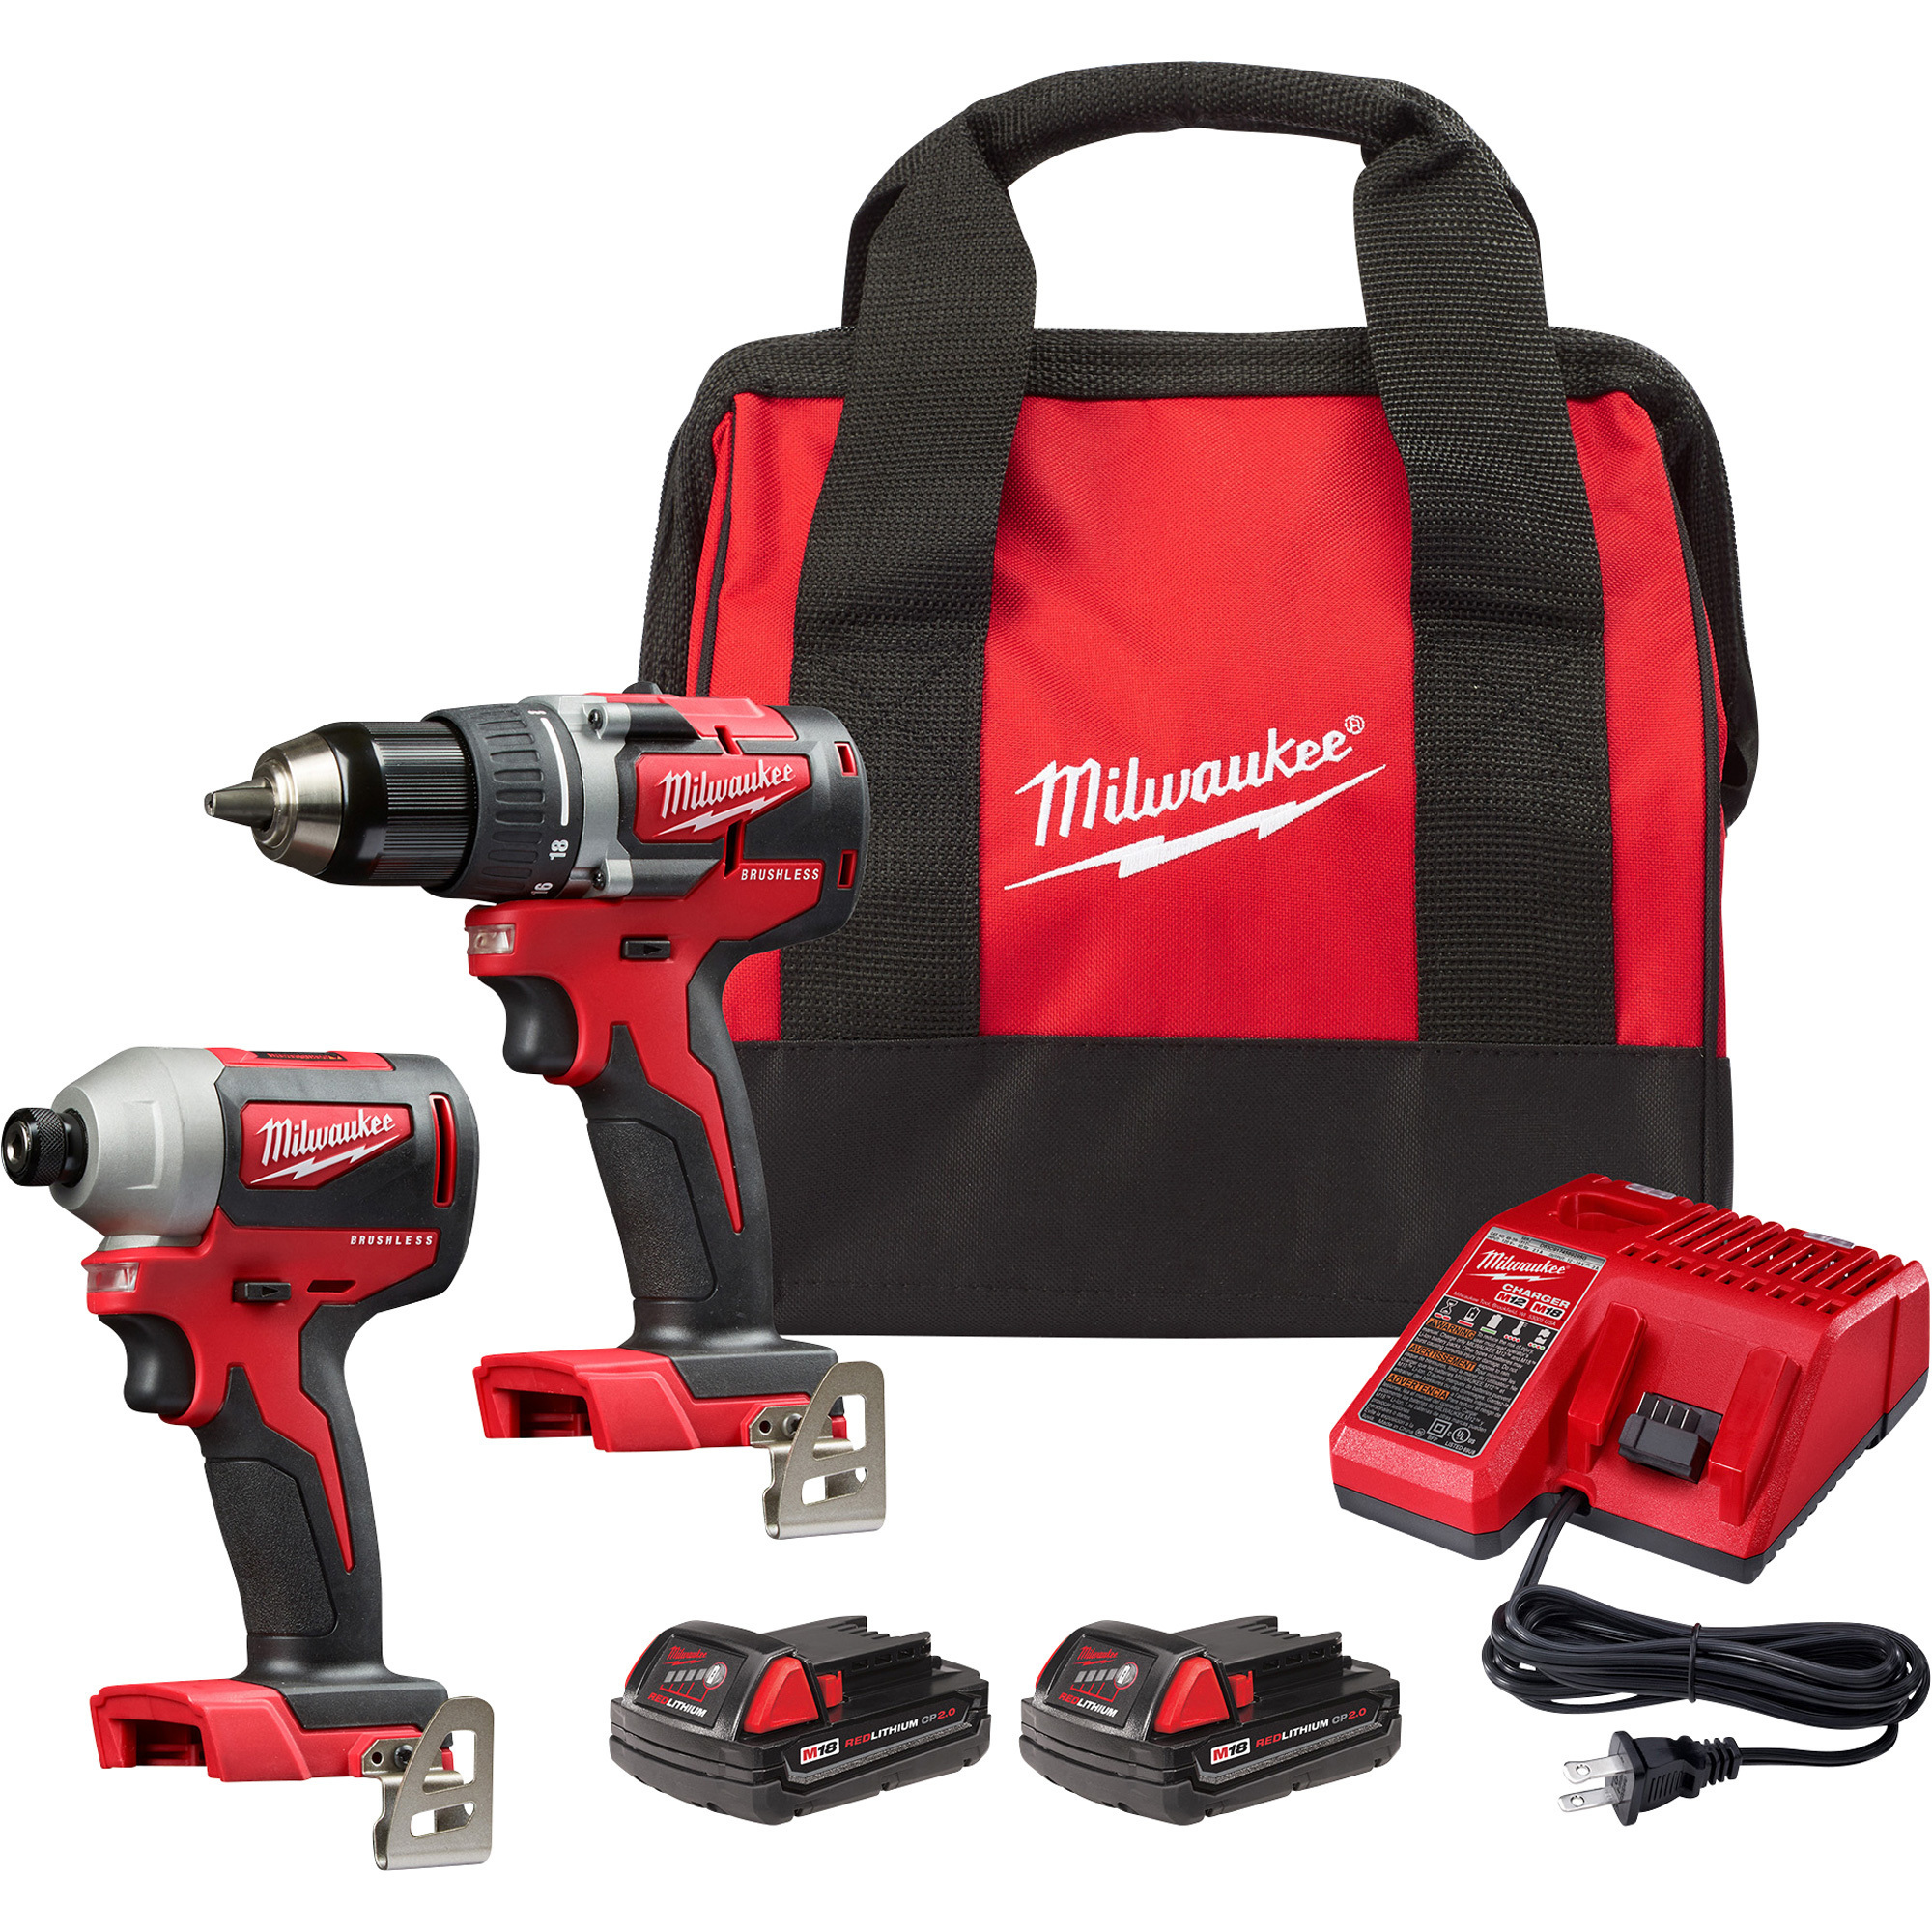 Milwaukee M18 2-Tool Brushless Combo Kit, 1/2in. Drill Driver, 1/4in. Hex  Impact Driver, 2 Batteries, Model# 2892-22CT